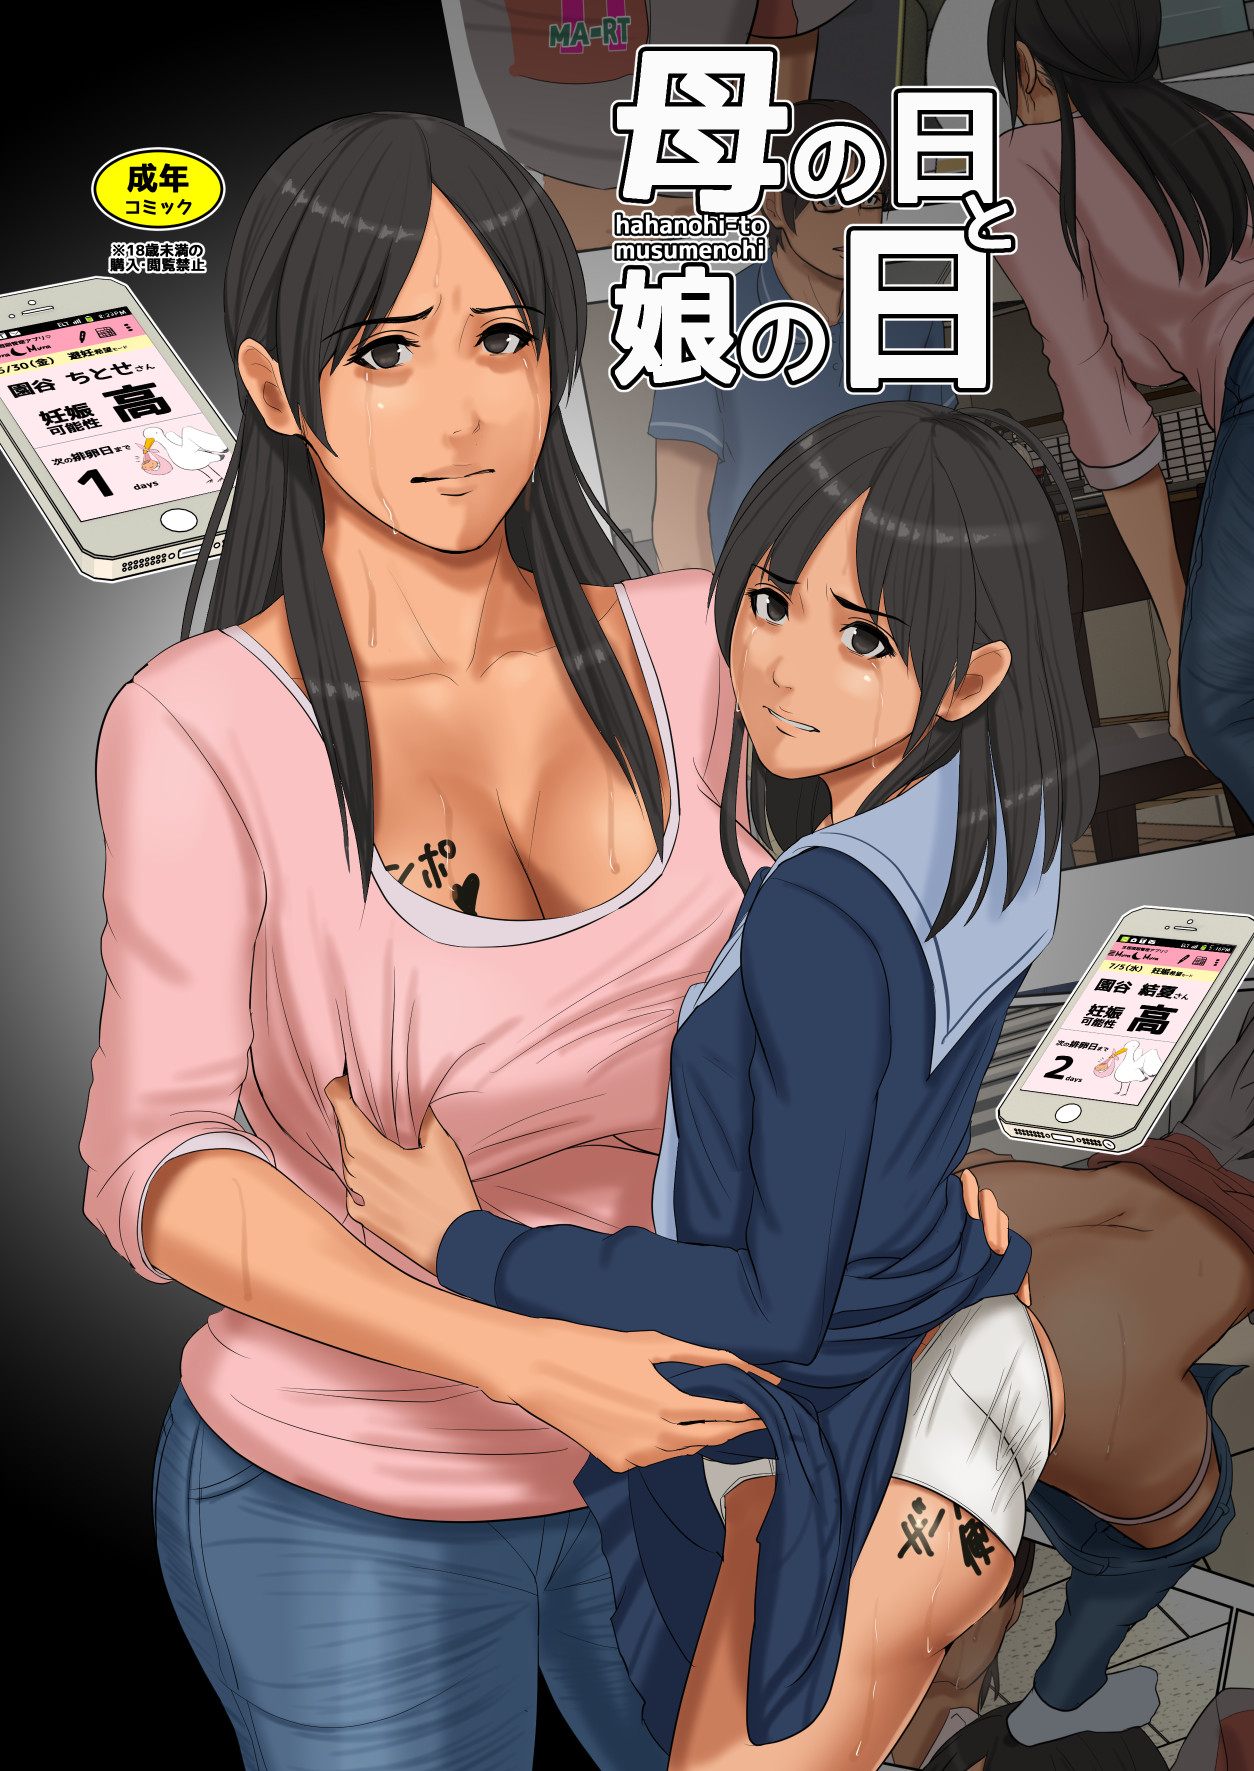 Yojouhan Shobou - Mothers Day and Daughters Day